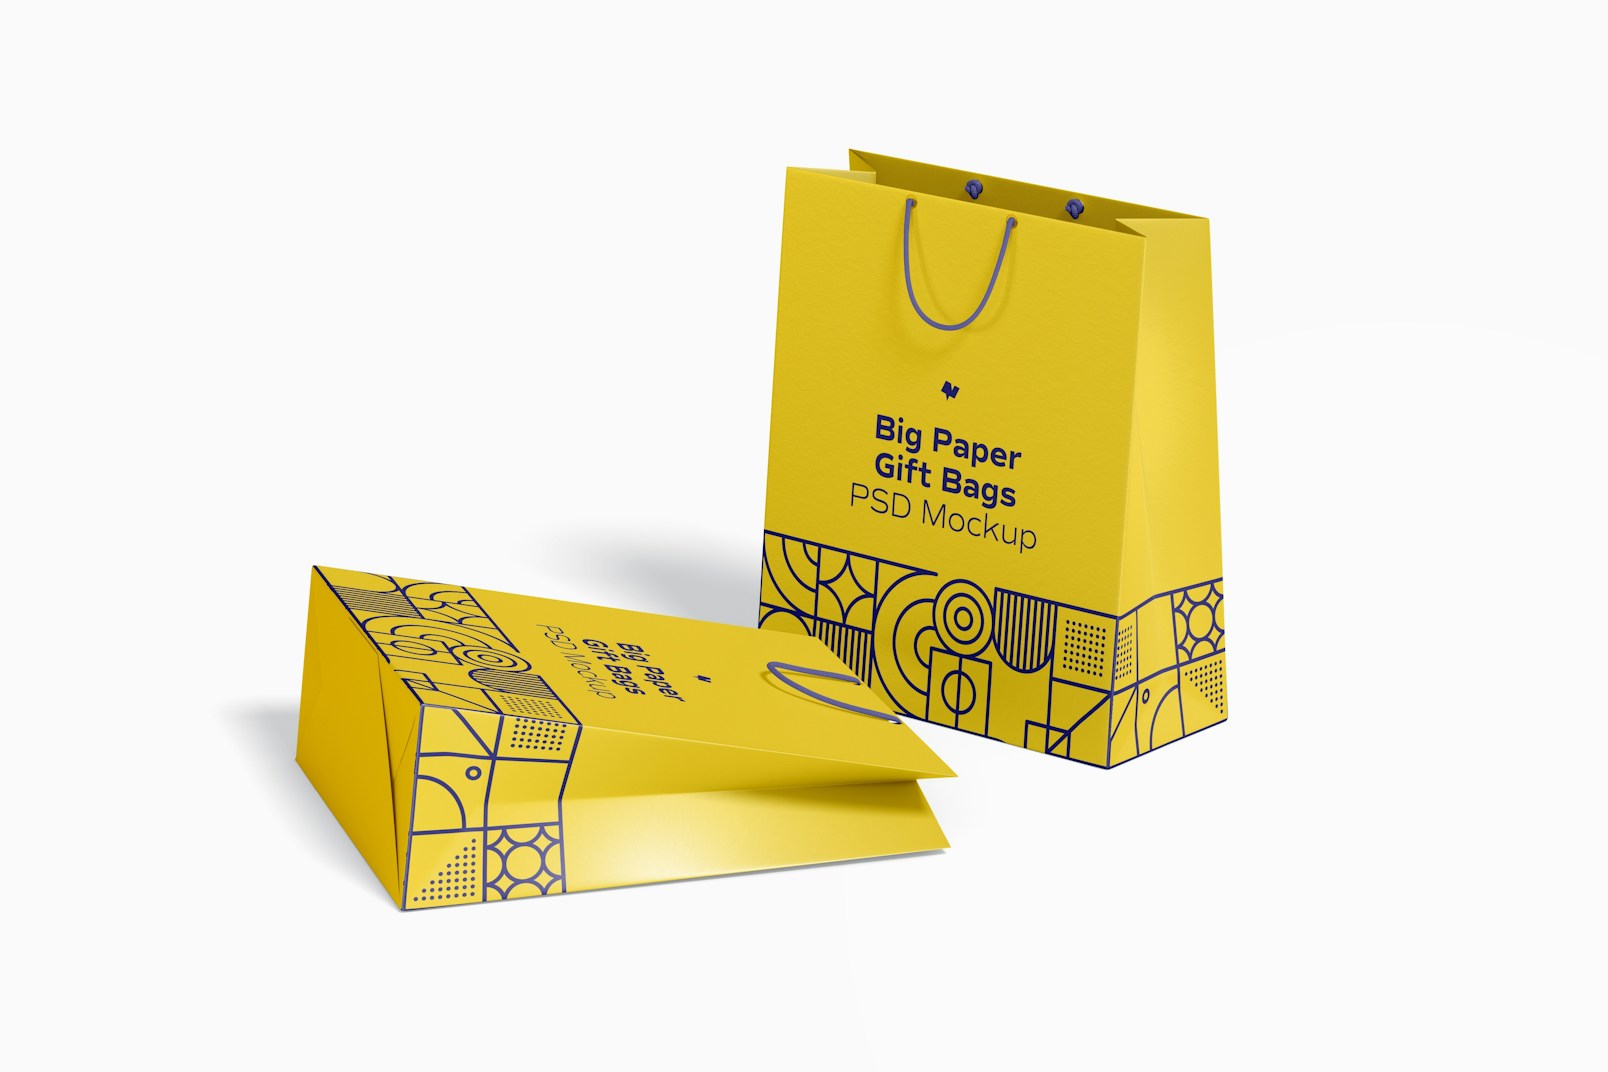 Big Paper Gift Bags With Rope Handle Mockup, Dropped